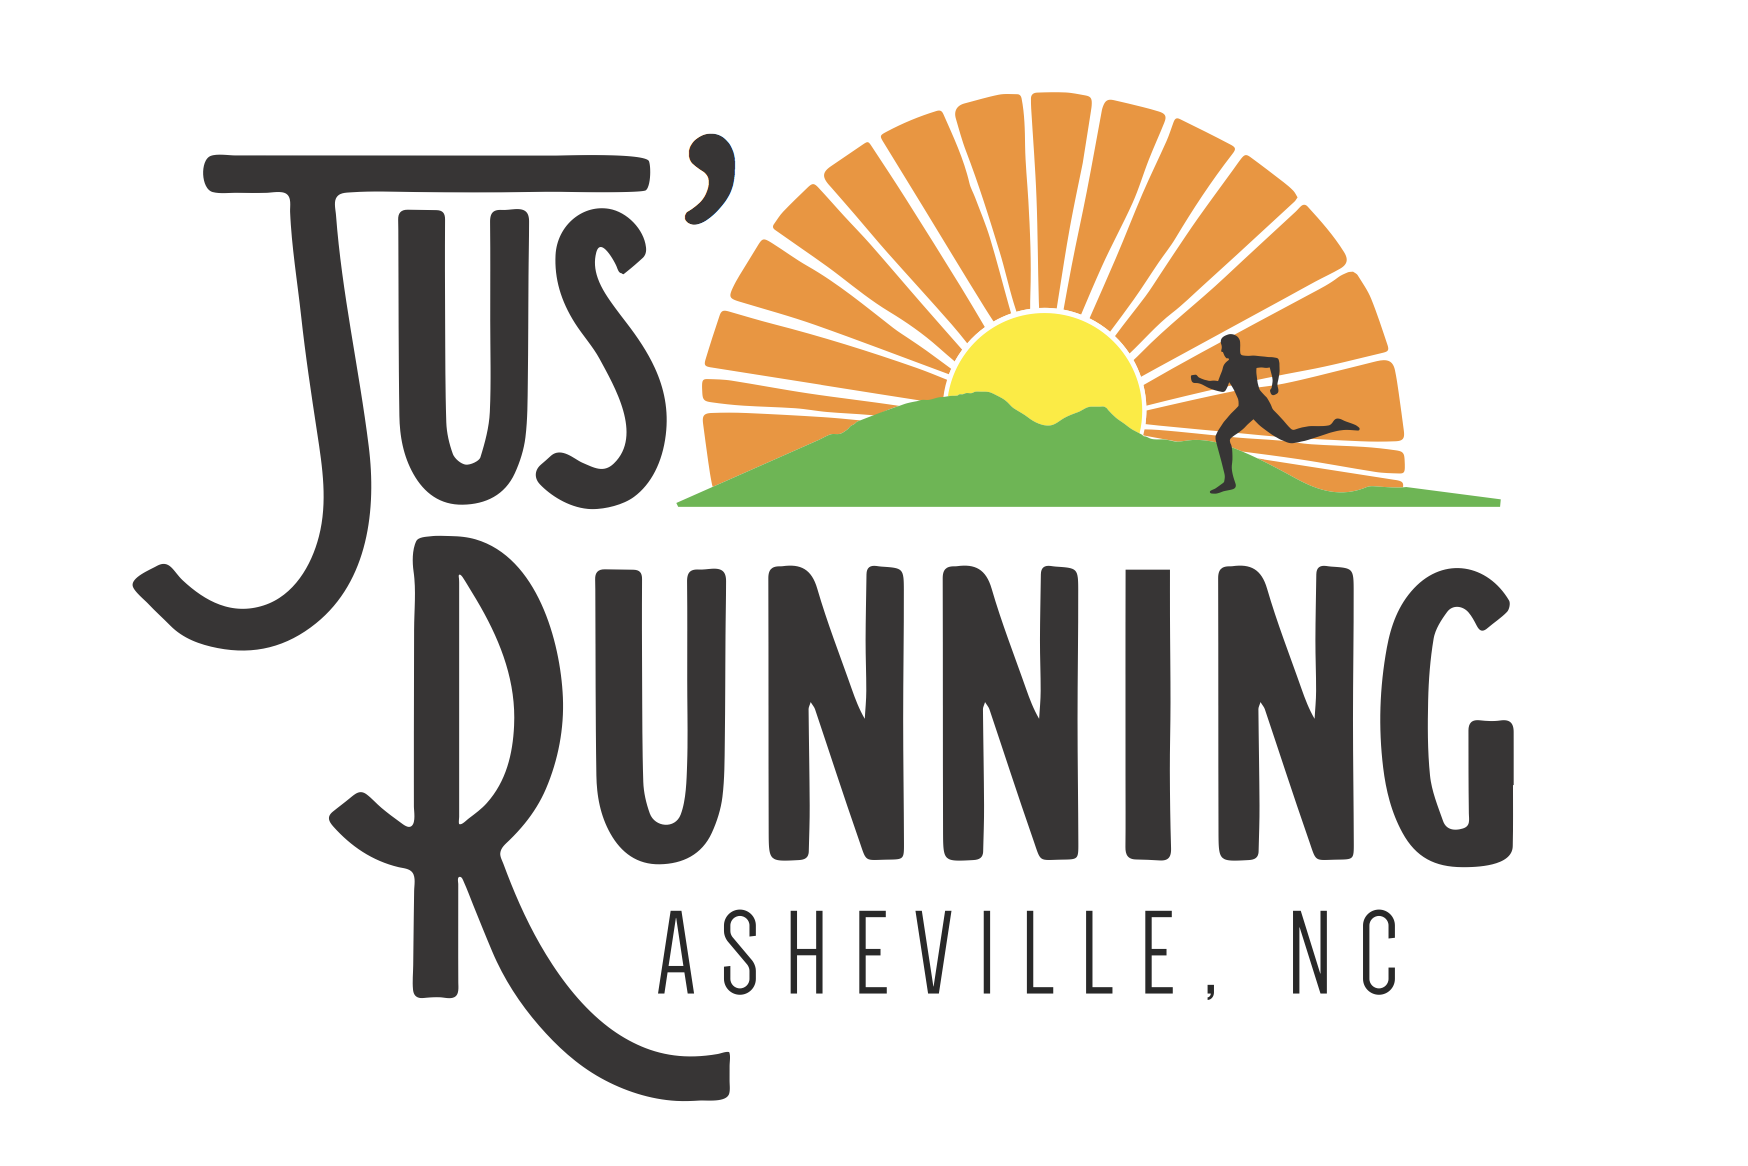 Jus-Running-new-logo-with-apostrophe-copy